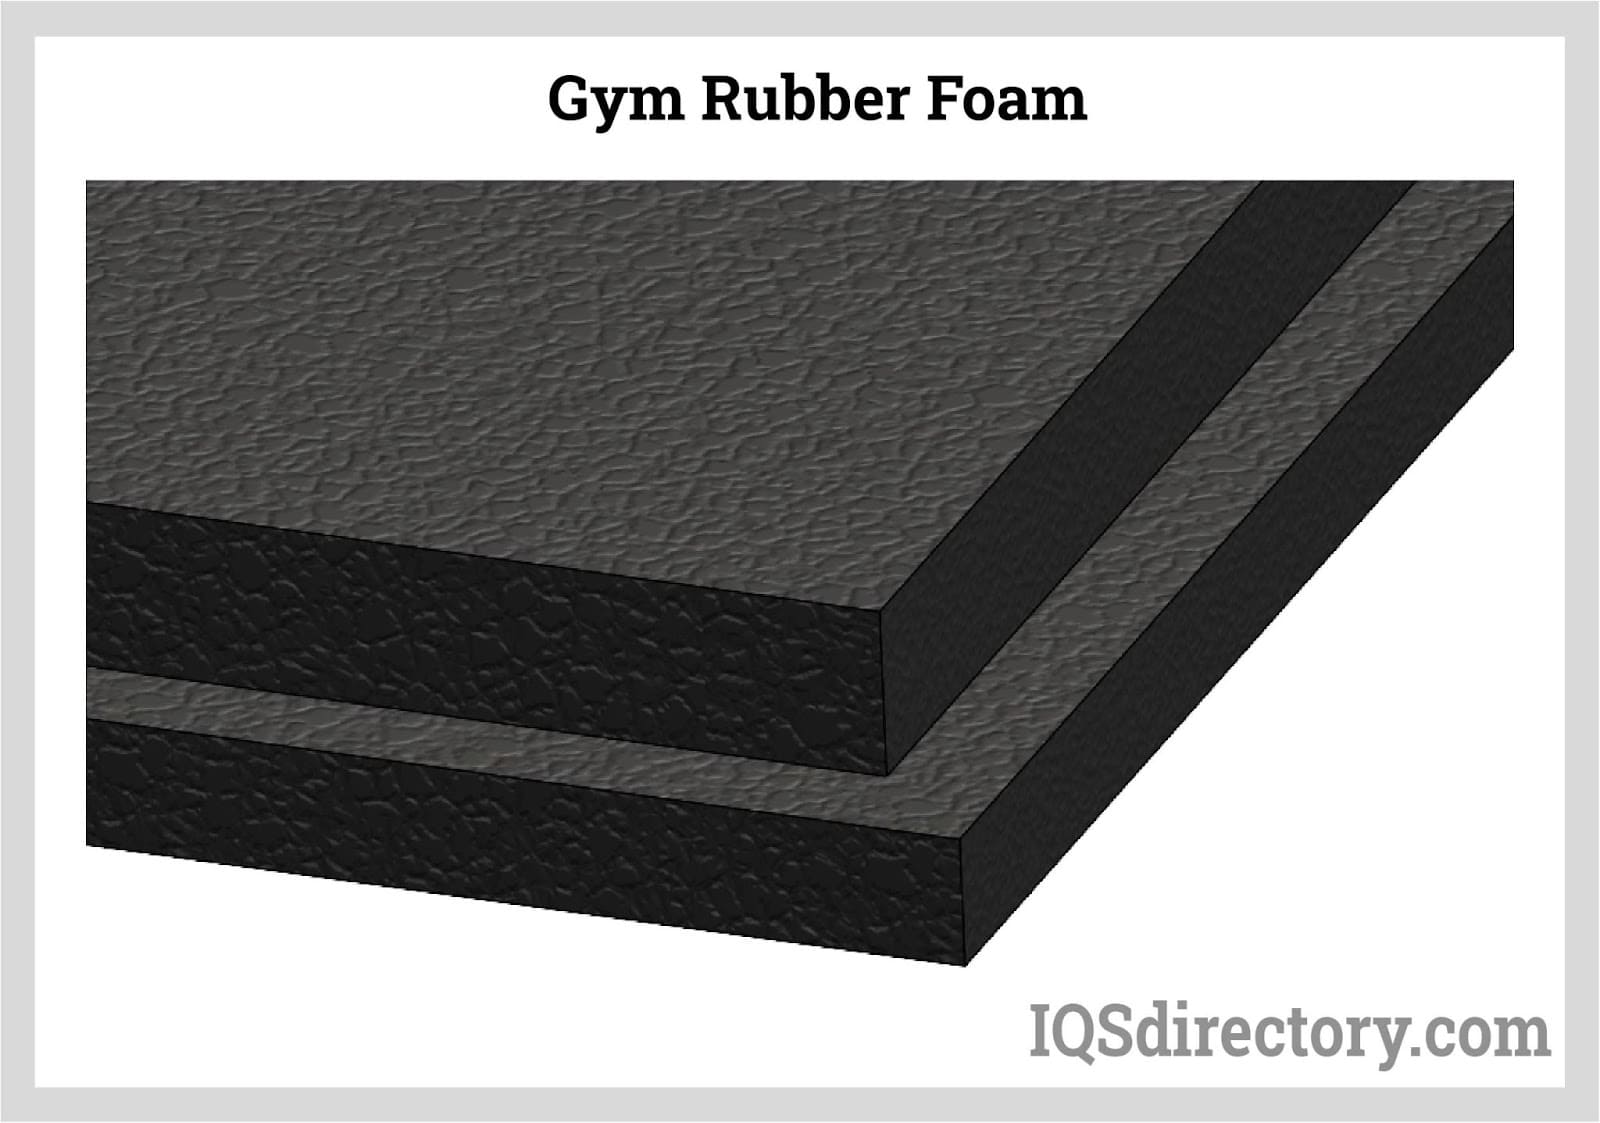 Closed Cell Foam: Types, Applications, Benefits, and Manufacturing